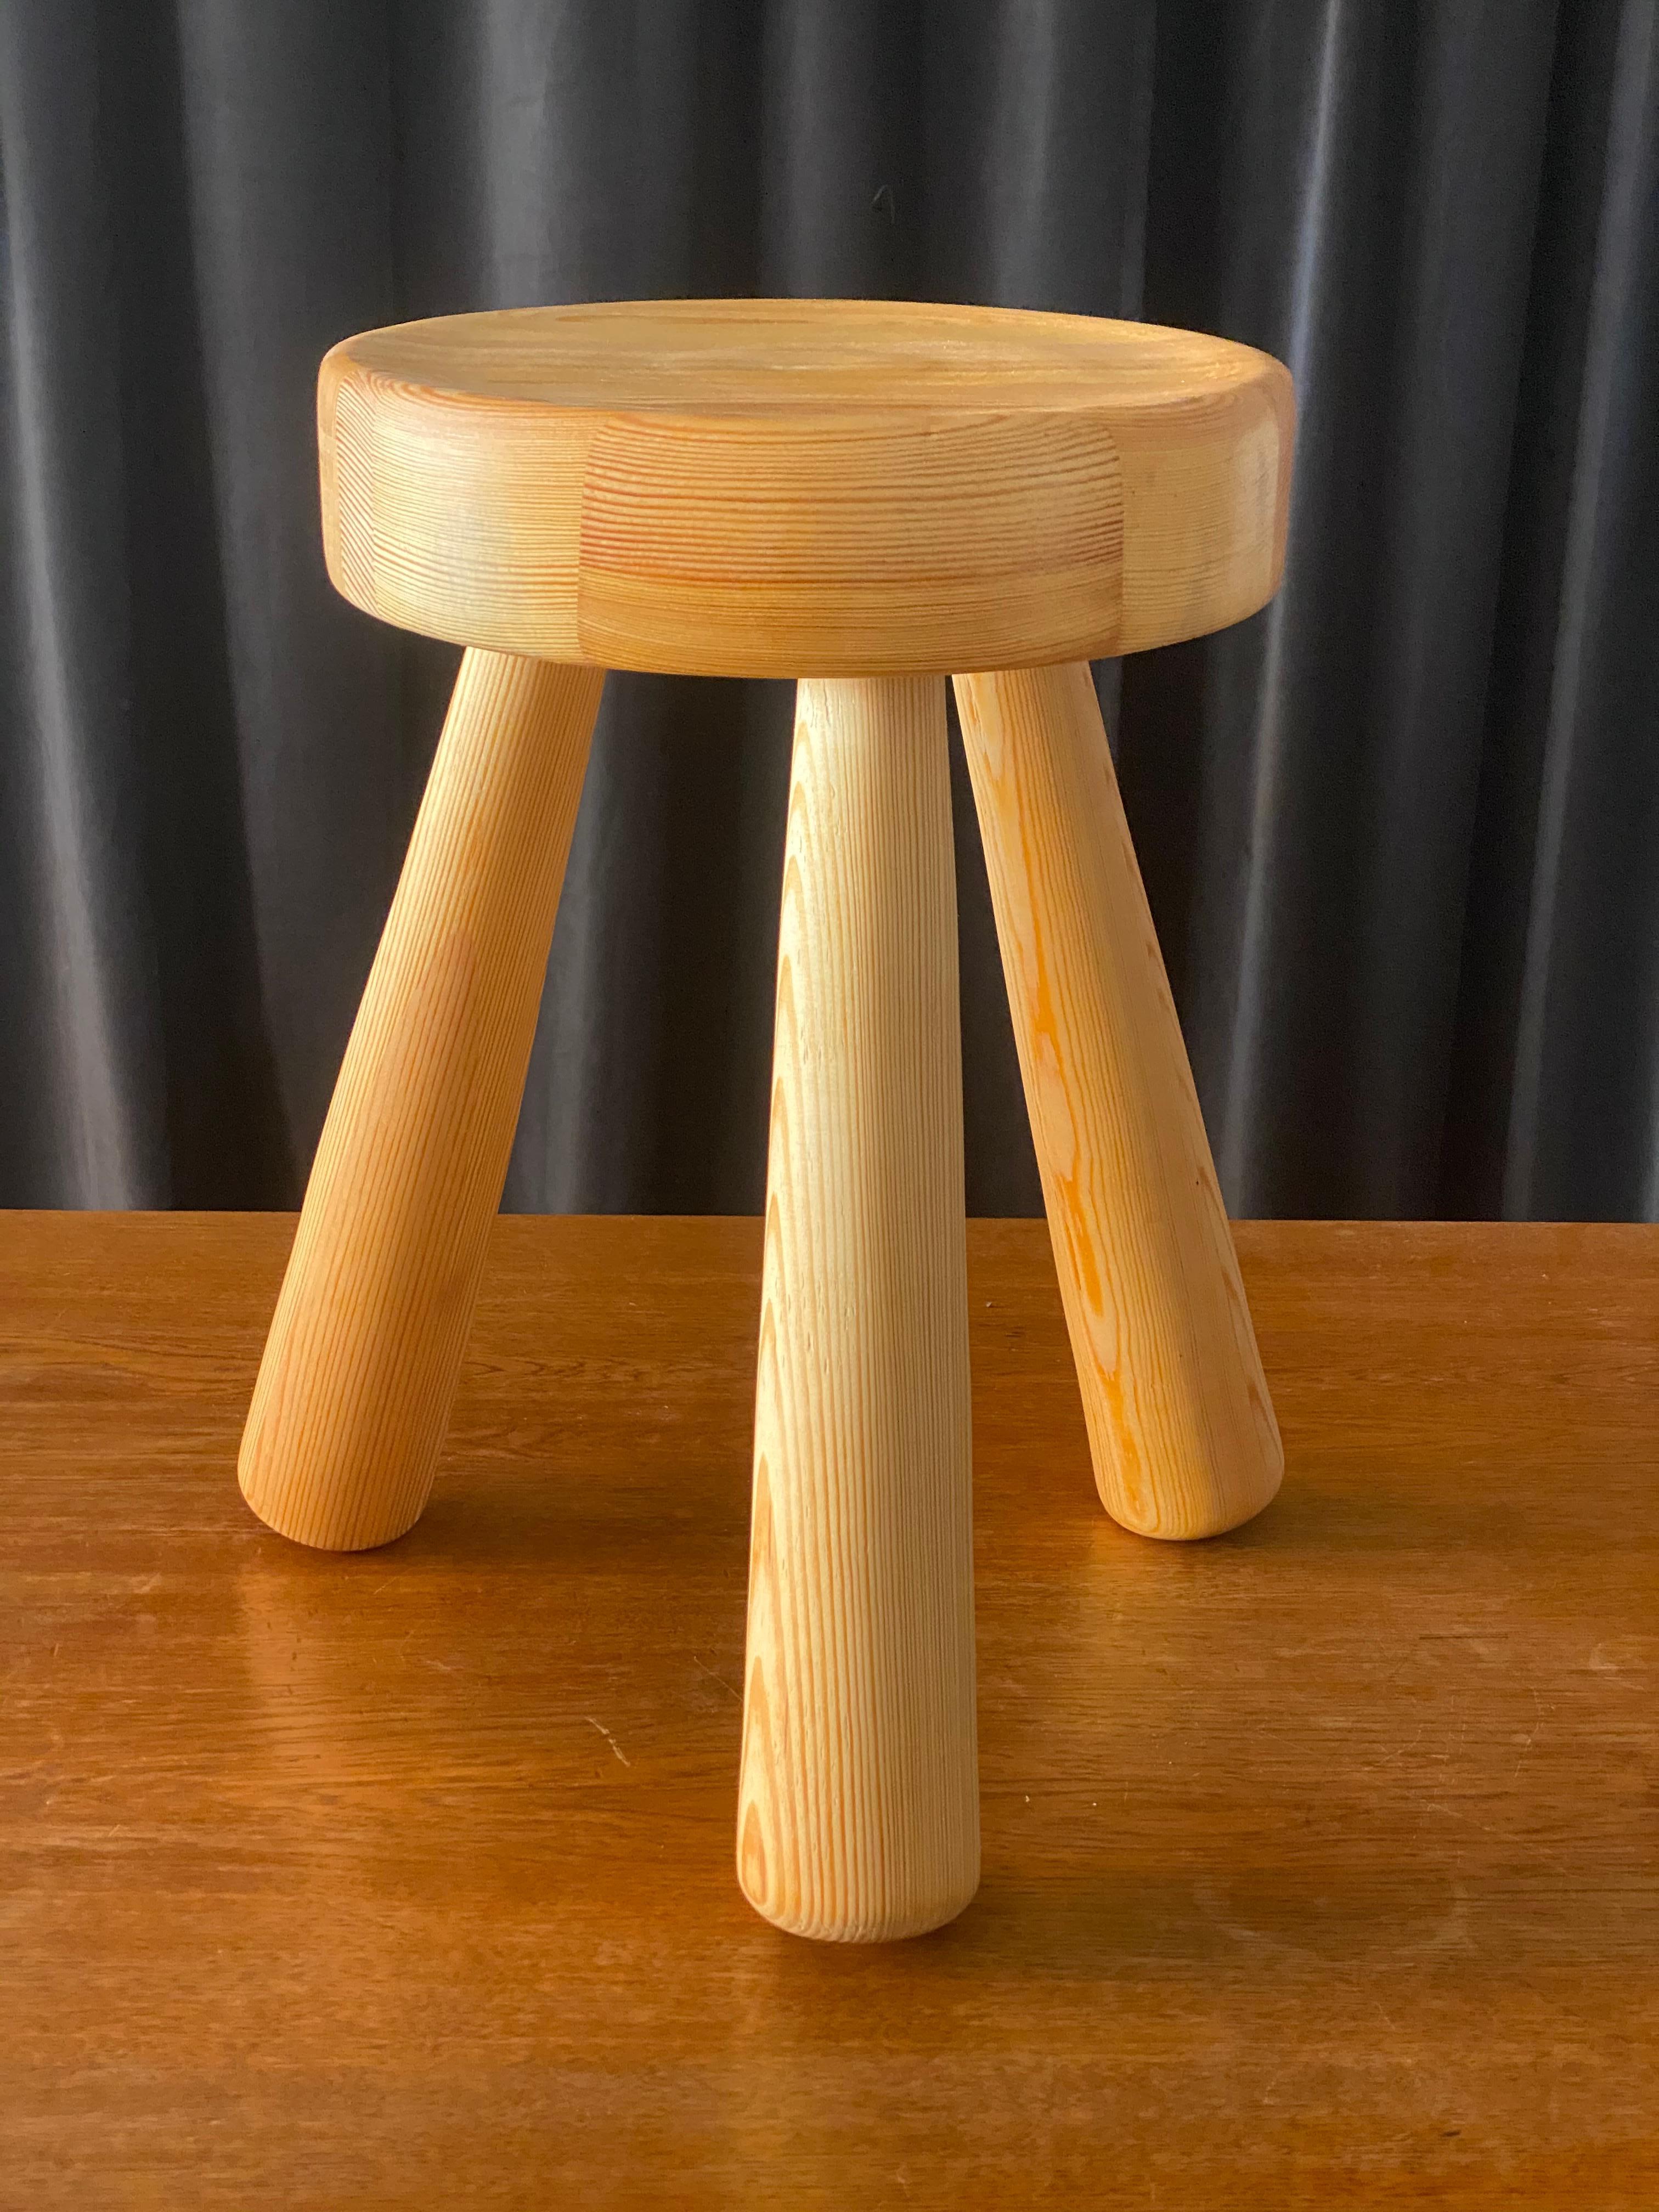 Late 20th Century Ingvar Hildingsson, Large Functionalist Stool, Pine, Sweden, Signed and Labeled